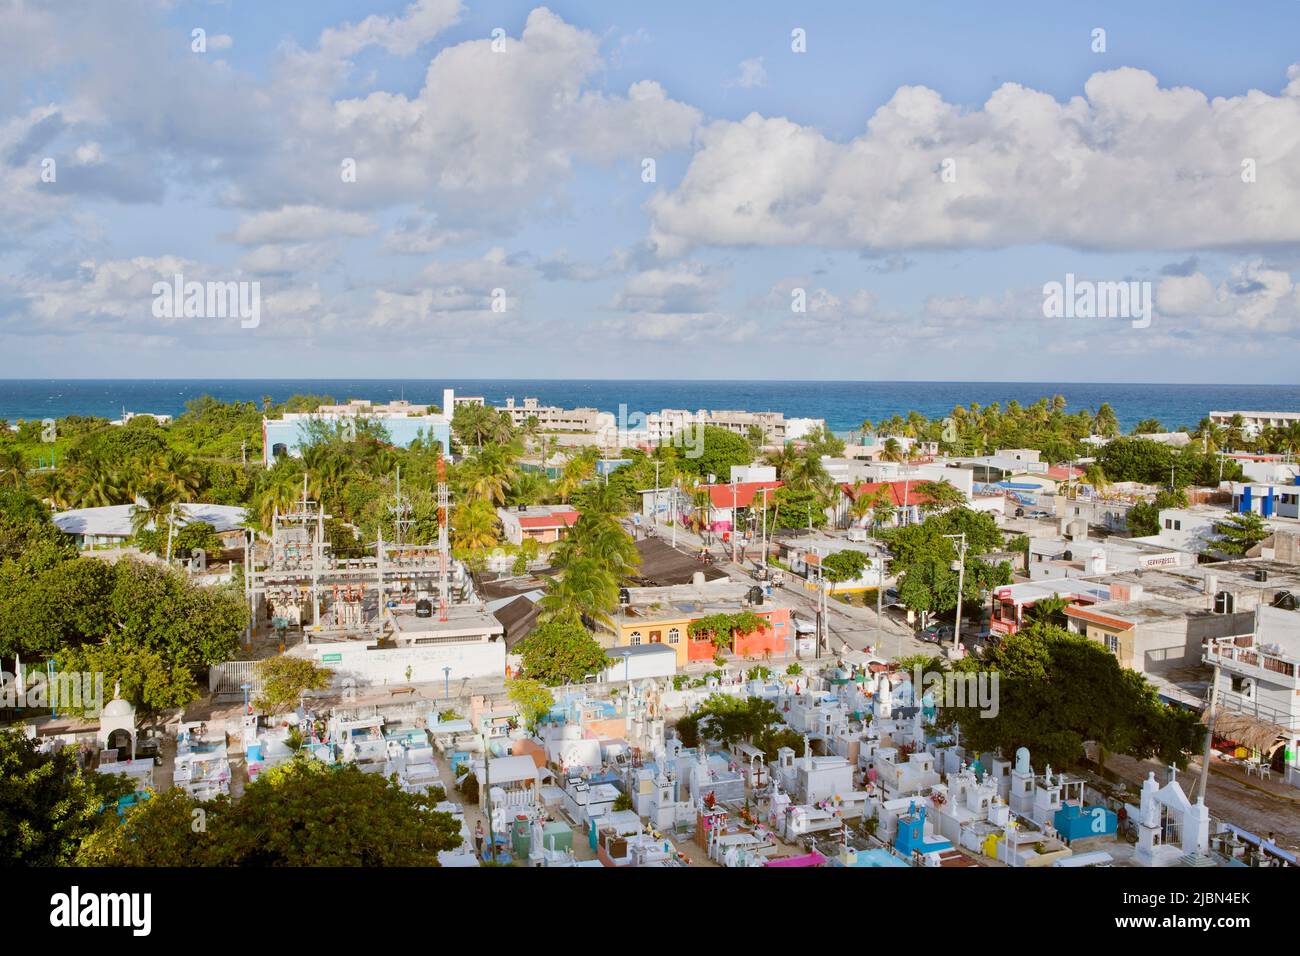 A colorful view of the local cemetery from Room #253, a Platinum Suite at Privelege Aluxes, Isla Mujeres, Quintana Roo, Mexico. Stock Photo